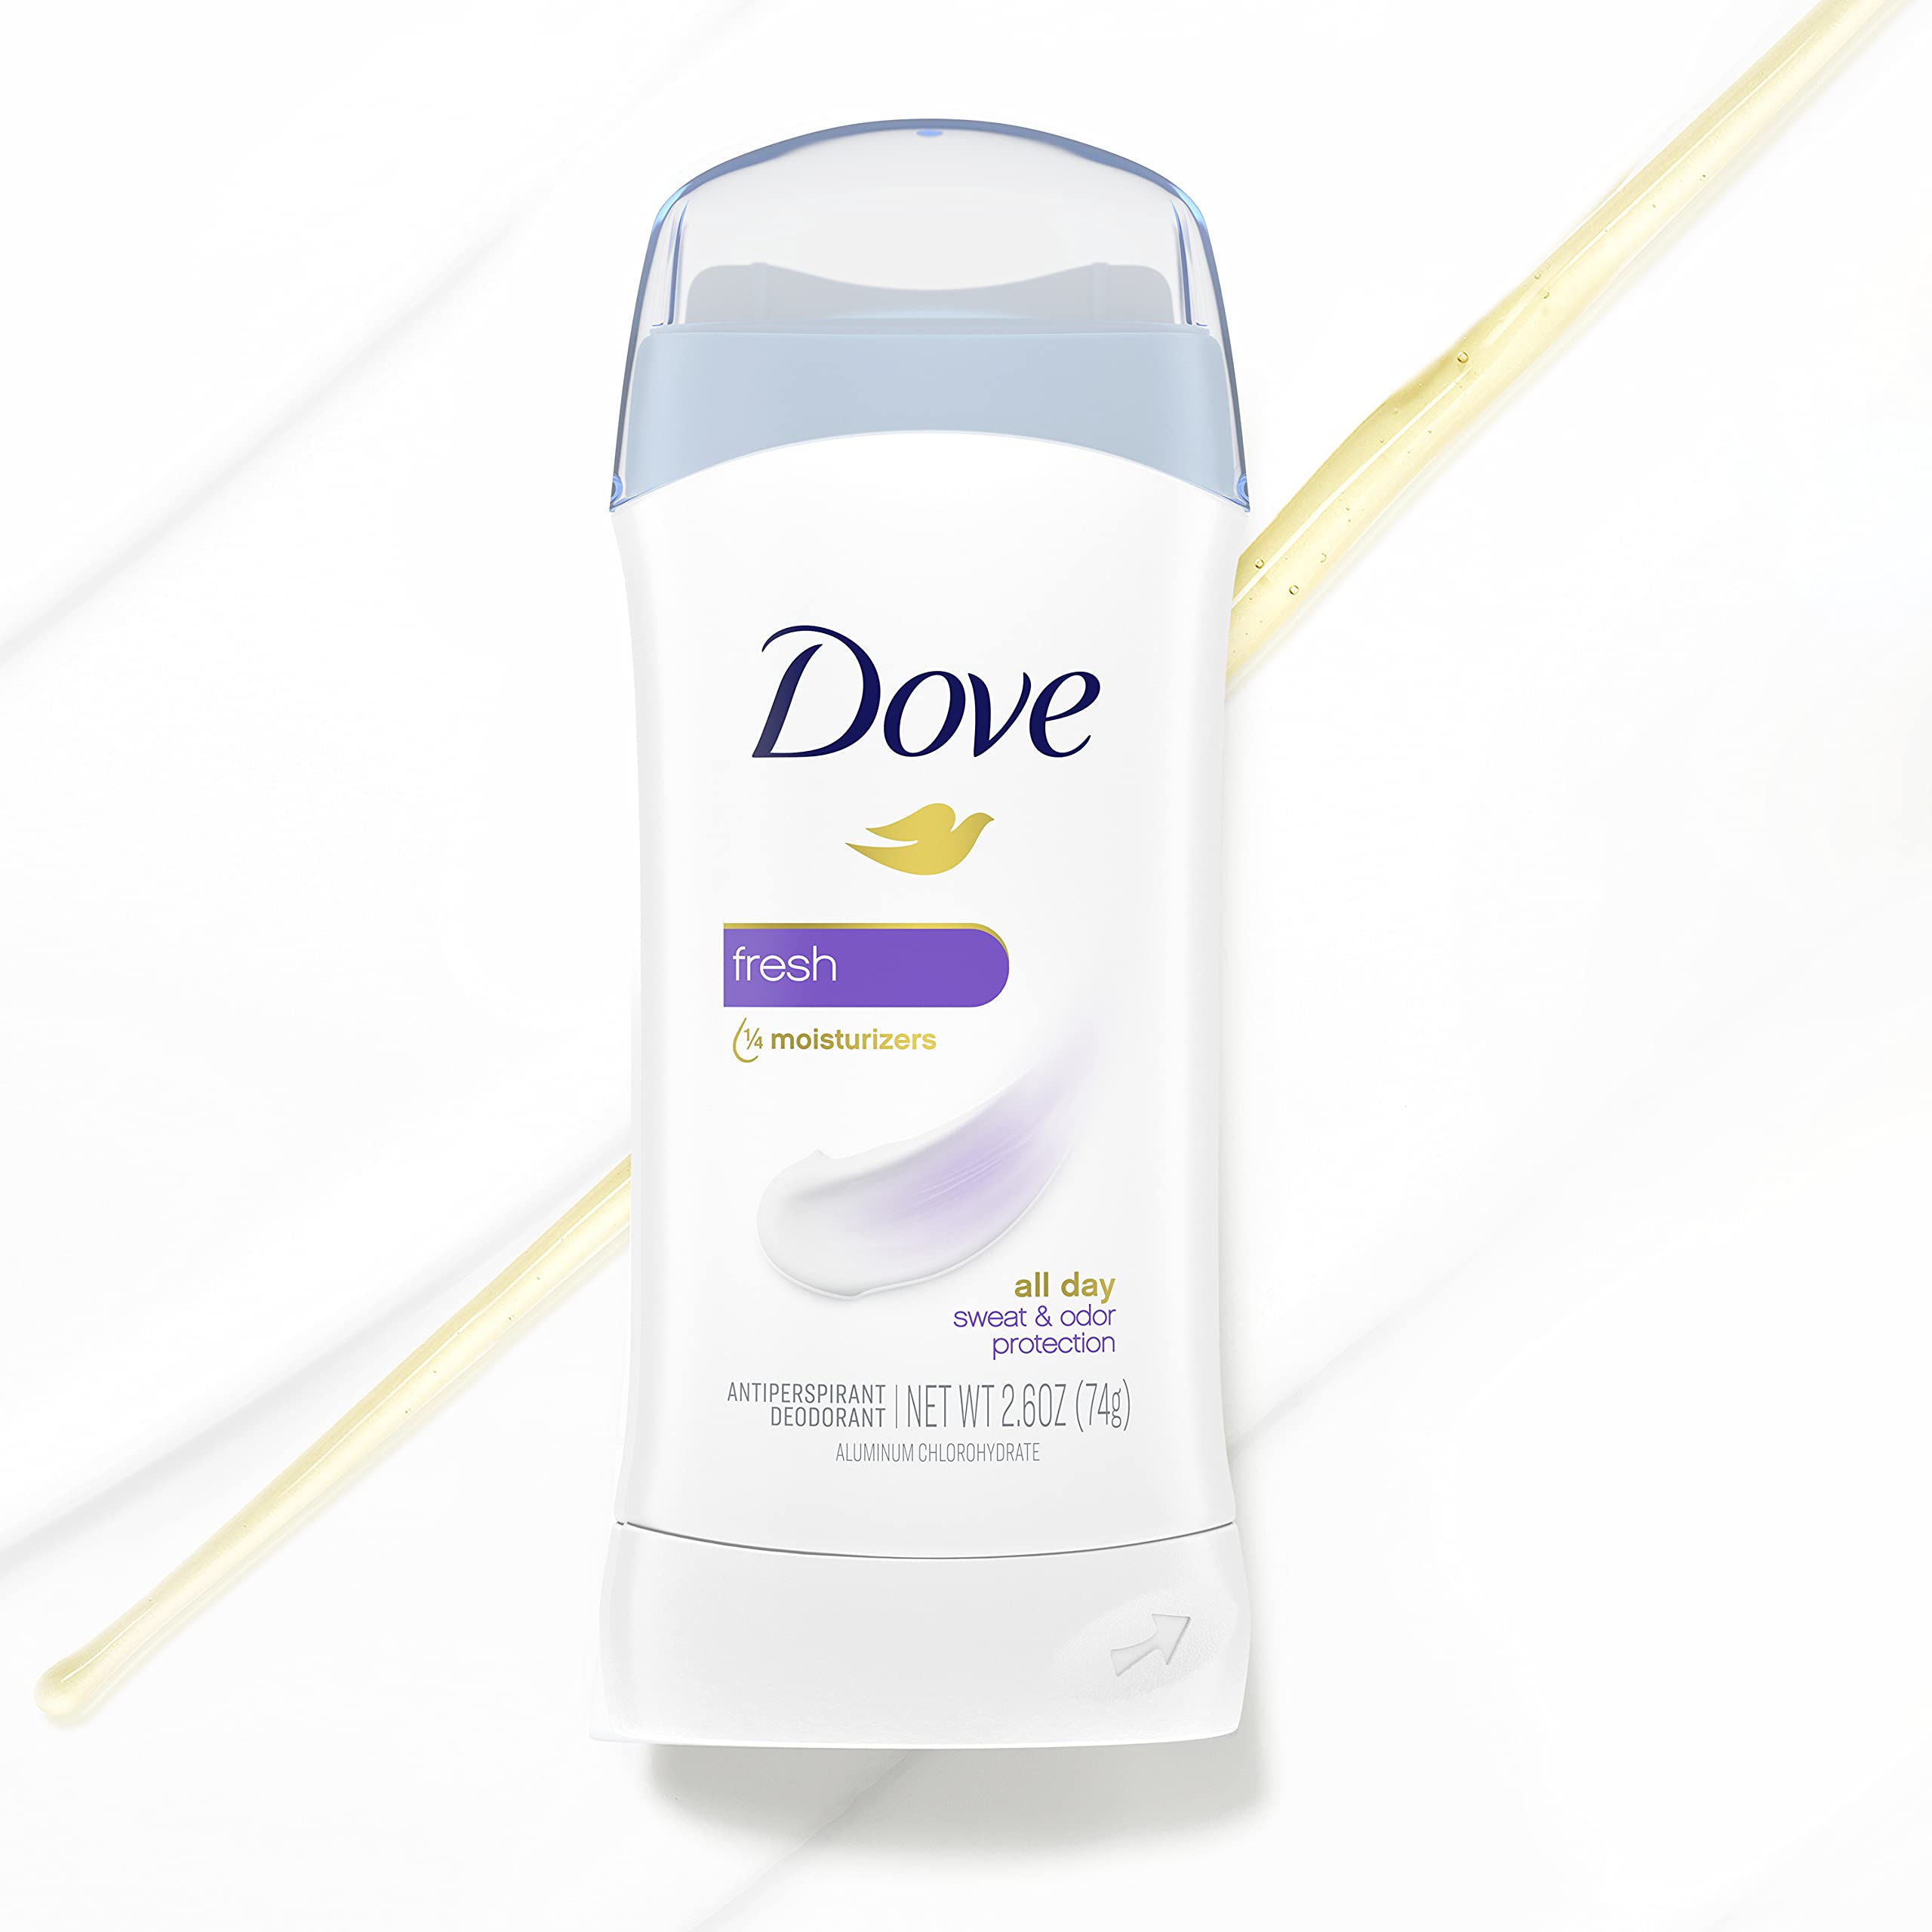 Dove Invisible Solid Antiperspirant Deodorant Stick for Women, Fresh, For All Day Underarm Sweat & Odor Protection 2.6 oz